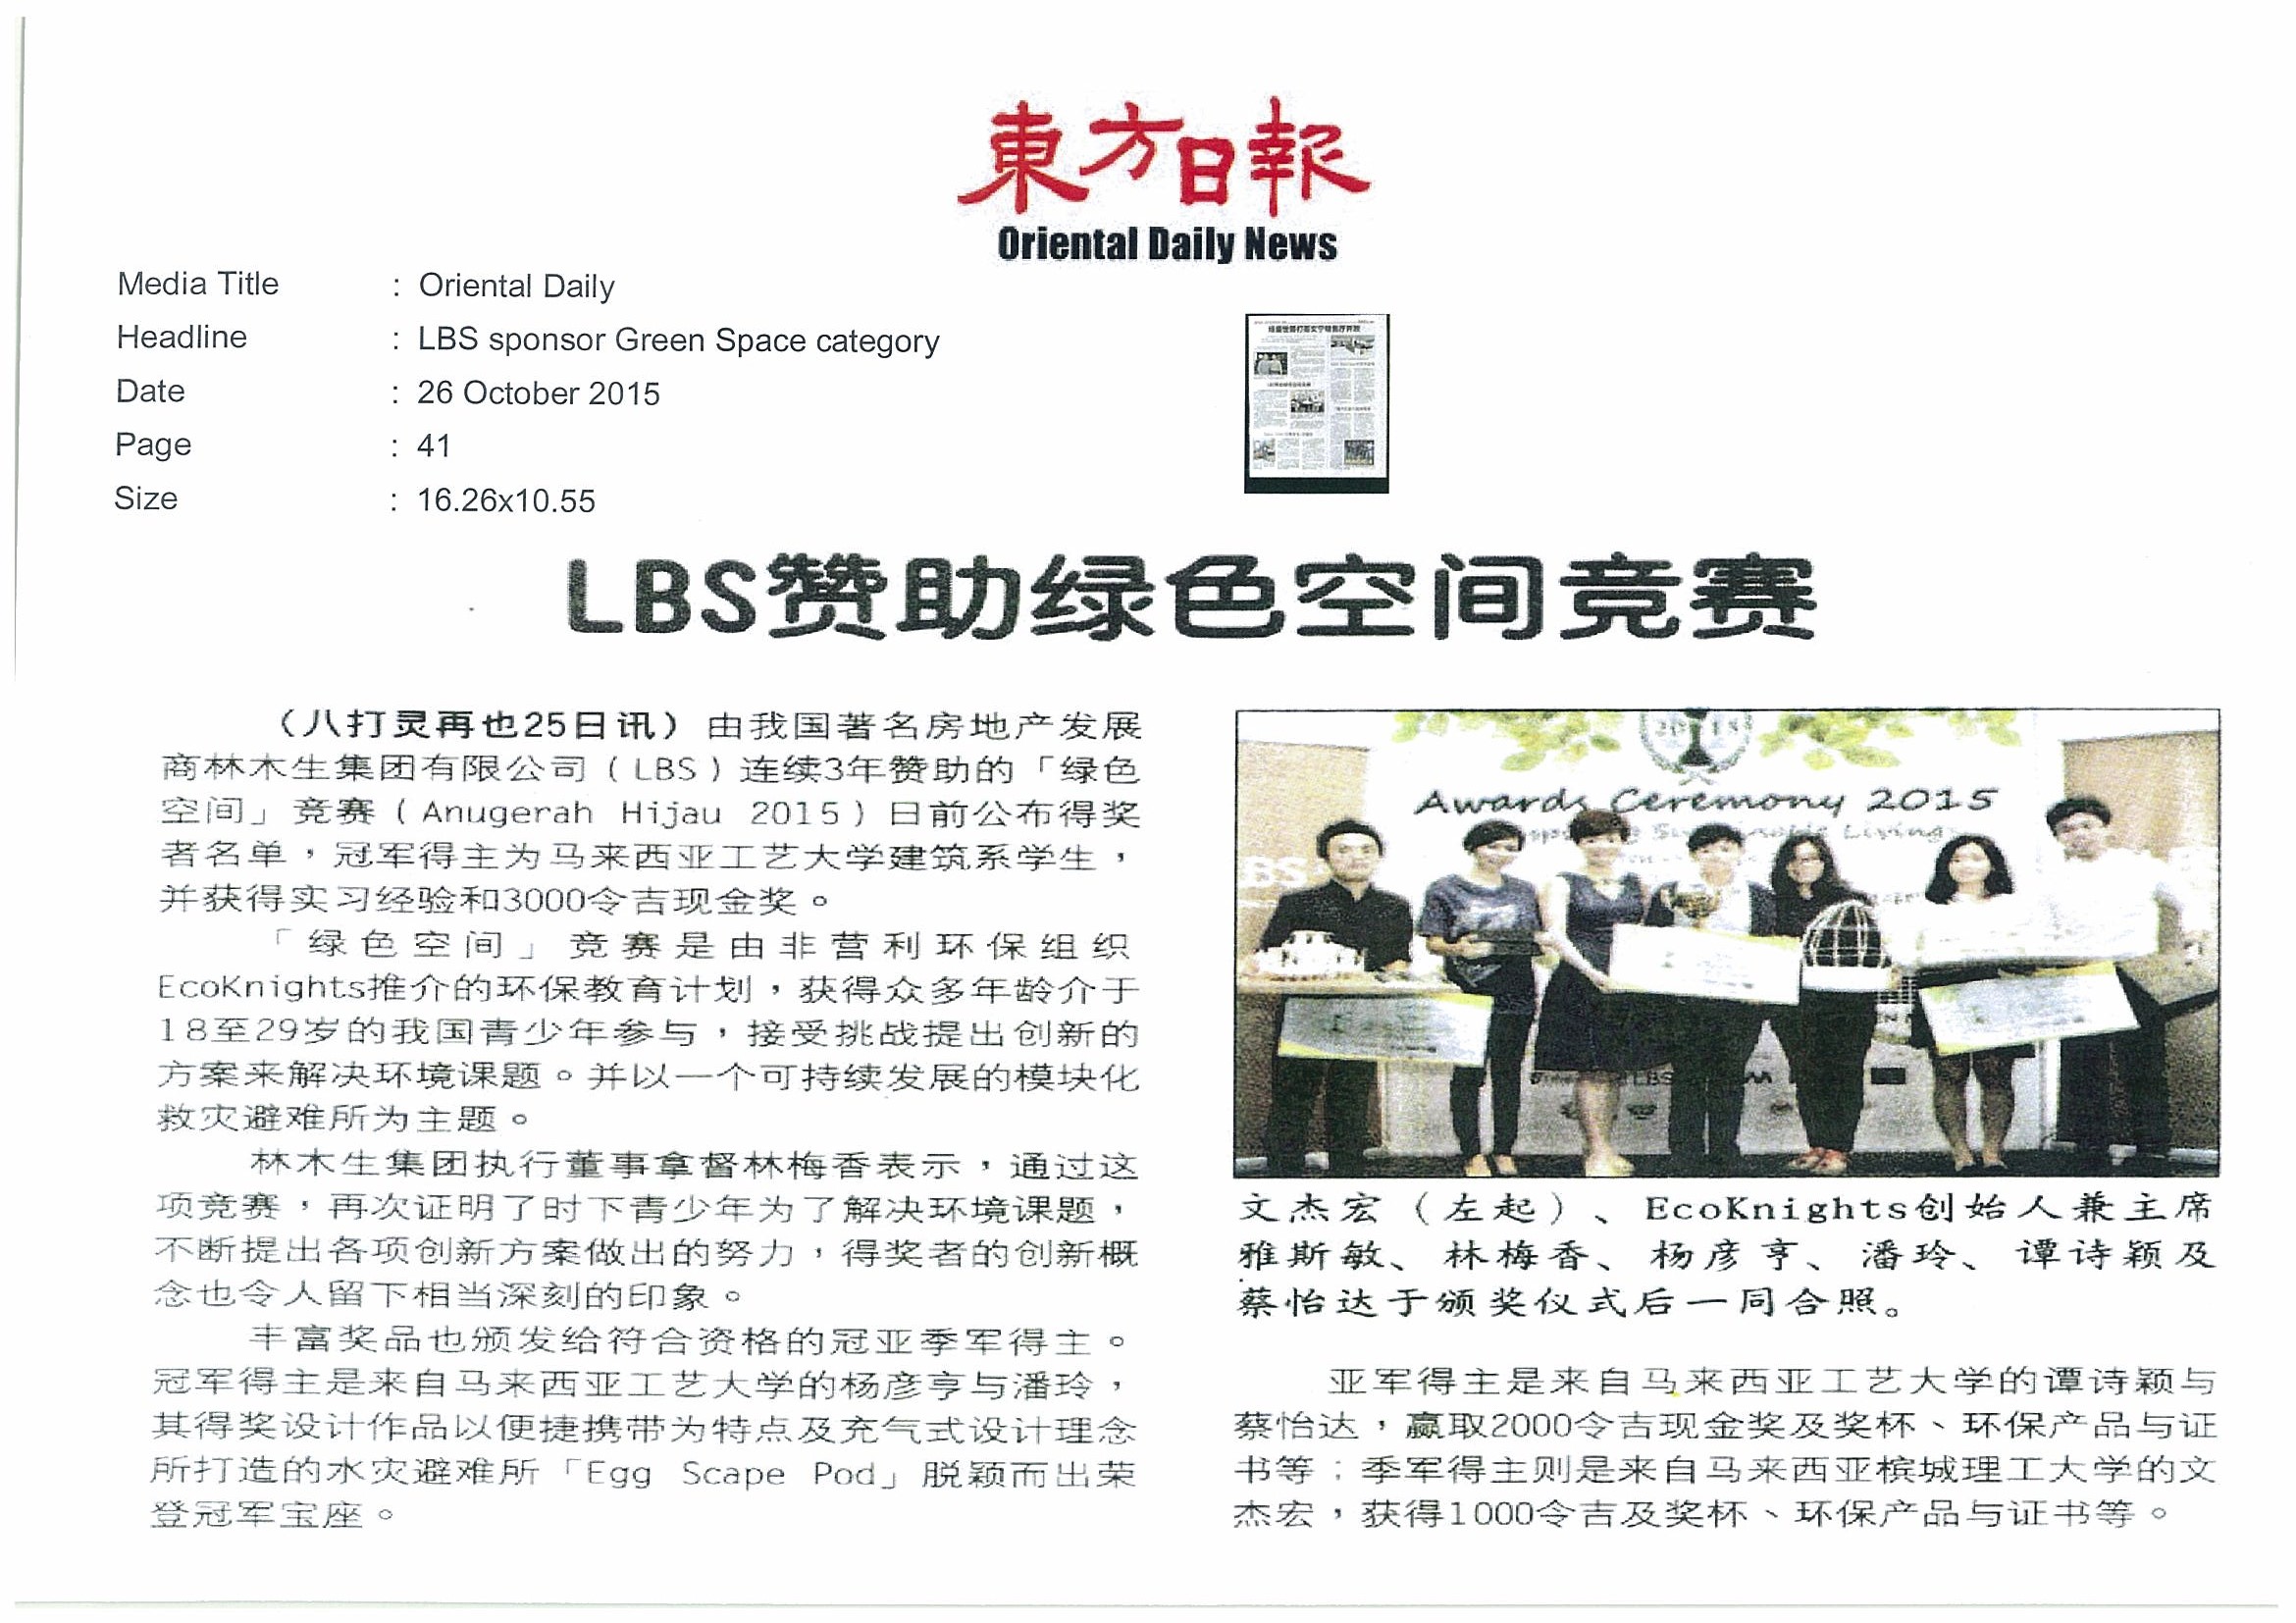 2015.10.26 Oriental Daily – LBS sponsor Green Space category